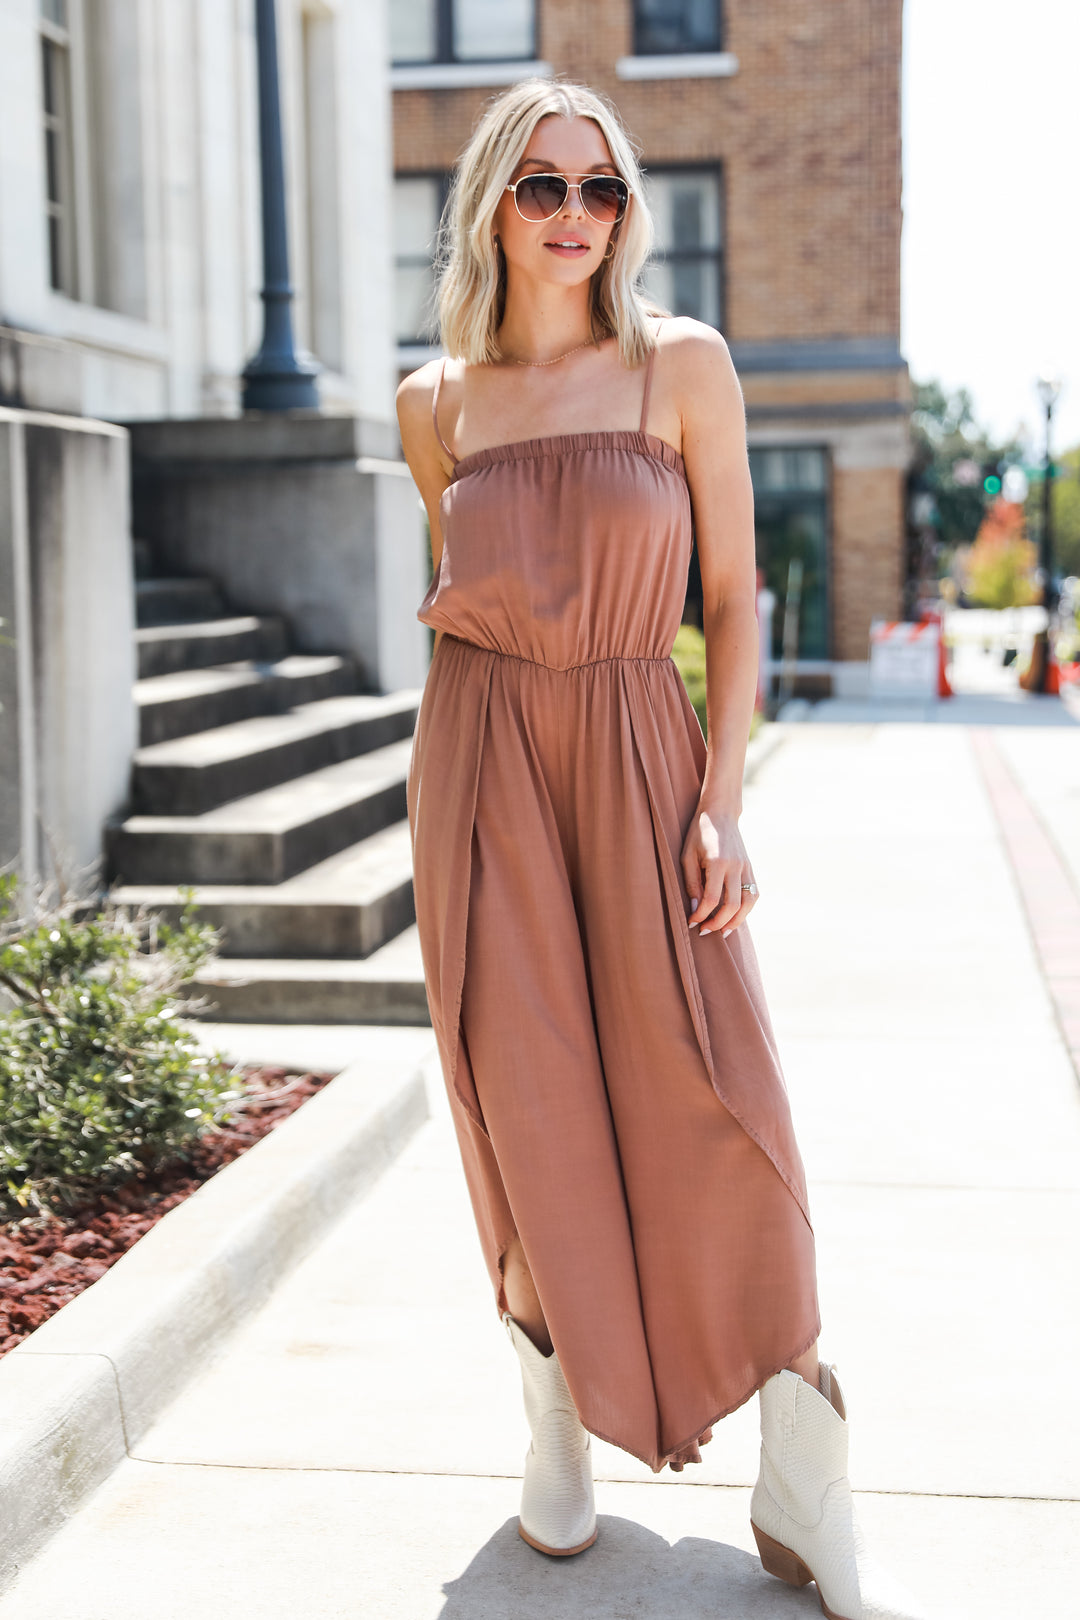 brown Jumpsuit from dress up boutique. Cute Jumpsuit for women